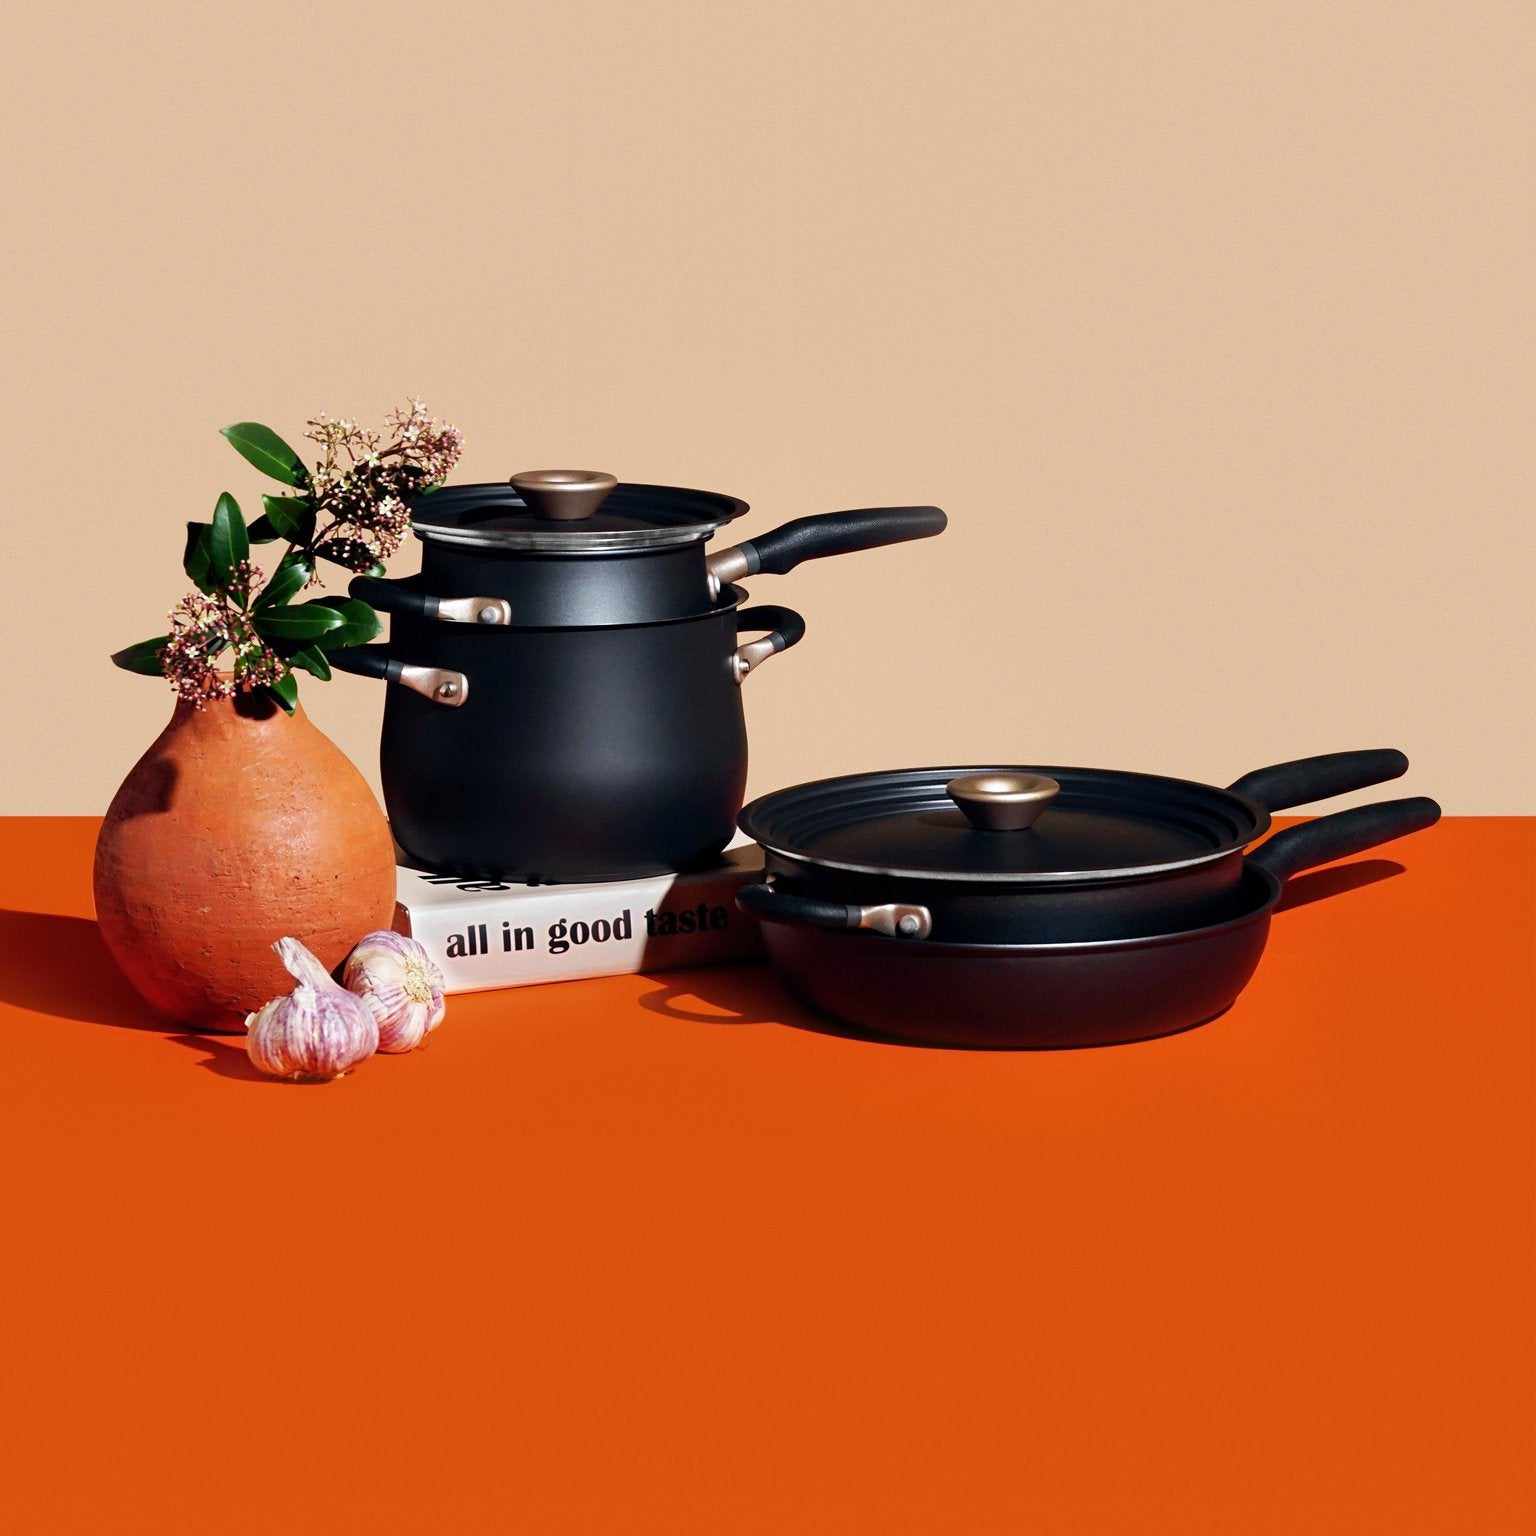 Meyer Canada - Canadian made cookware and international kitchen brands